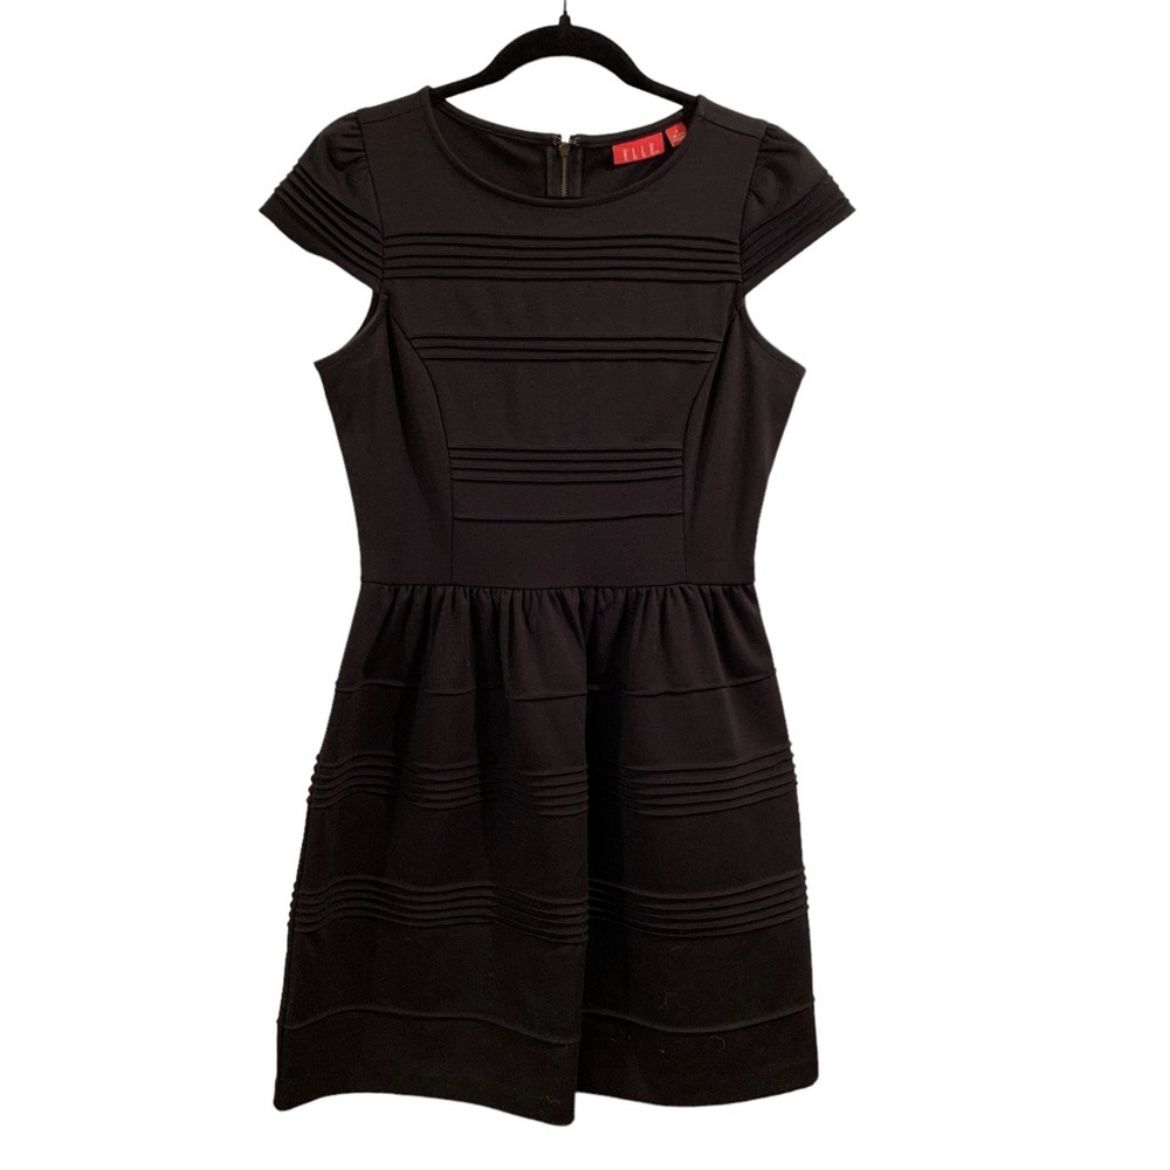 Fit & Flare Knit Cap Sleeve Pleated Dress